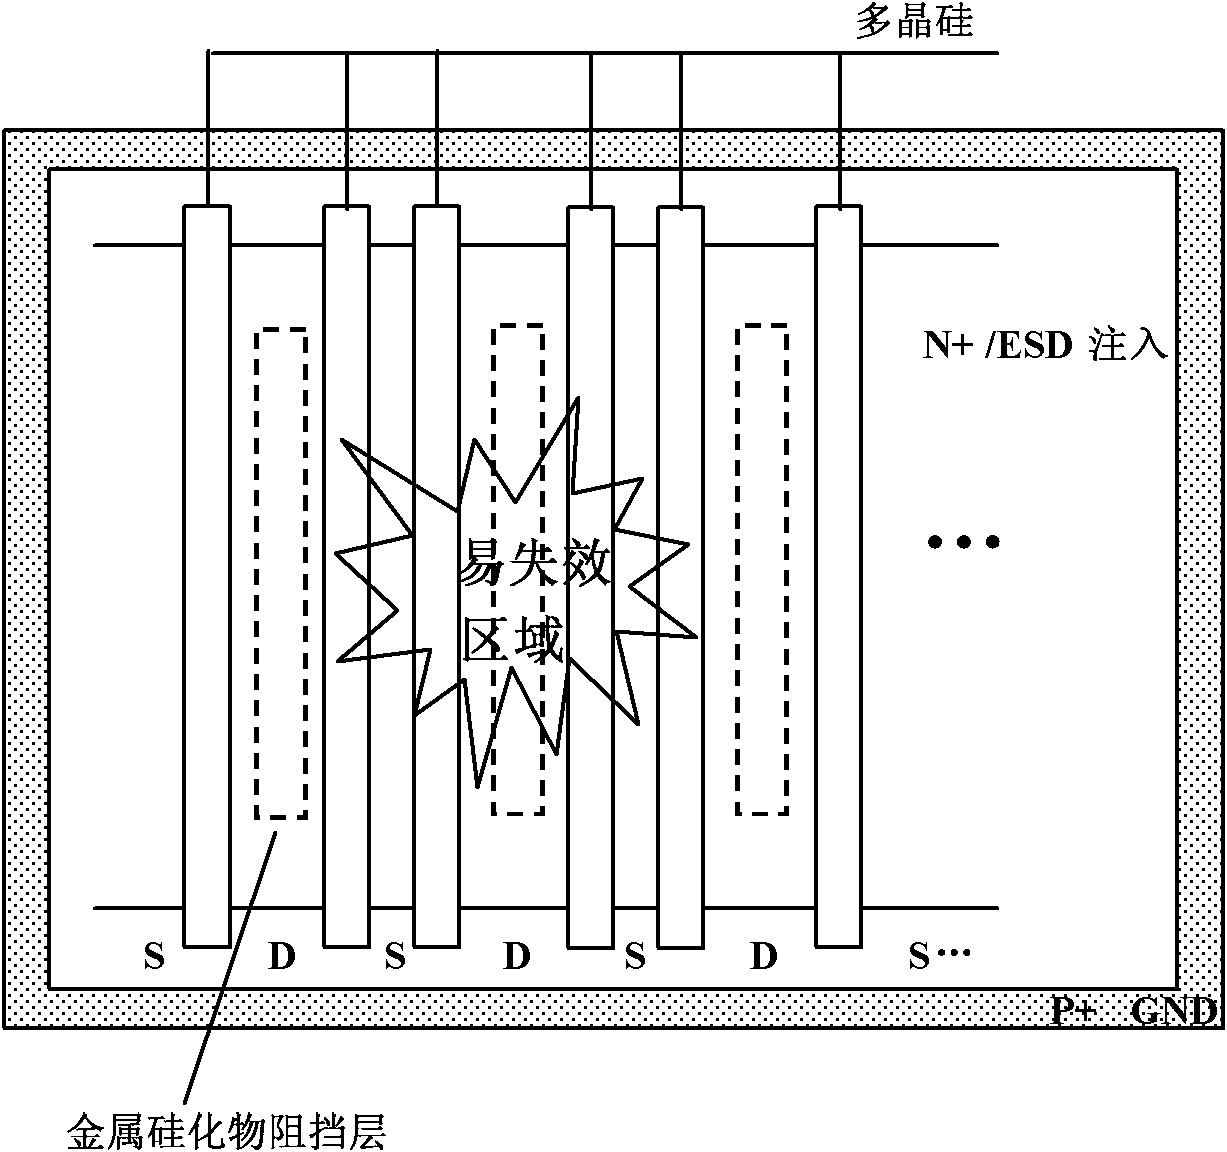 Grounded-grid NMOS (N-channel metal oxide semiconductor) unit for antistatic protection and antistatic protection structure thereof